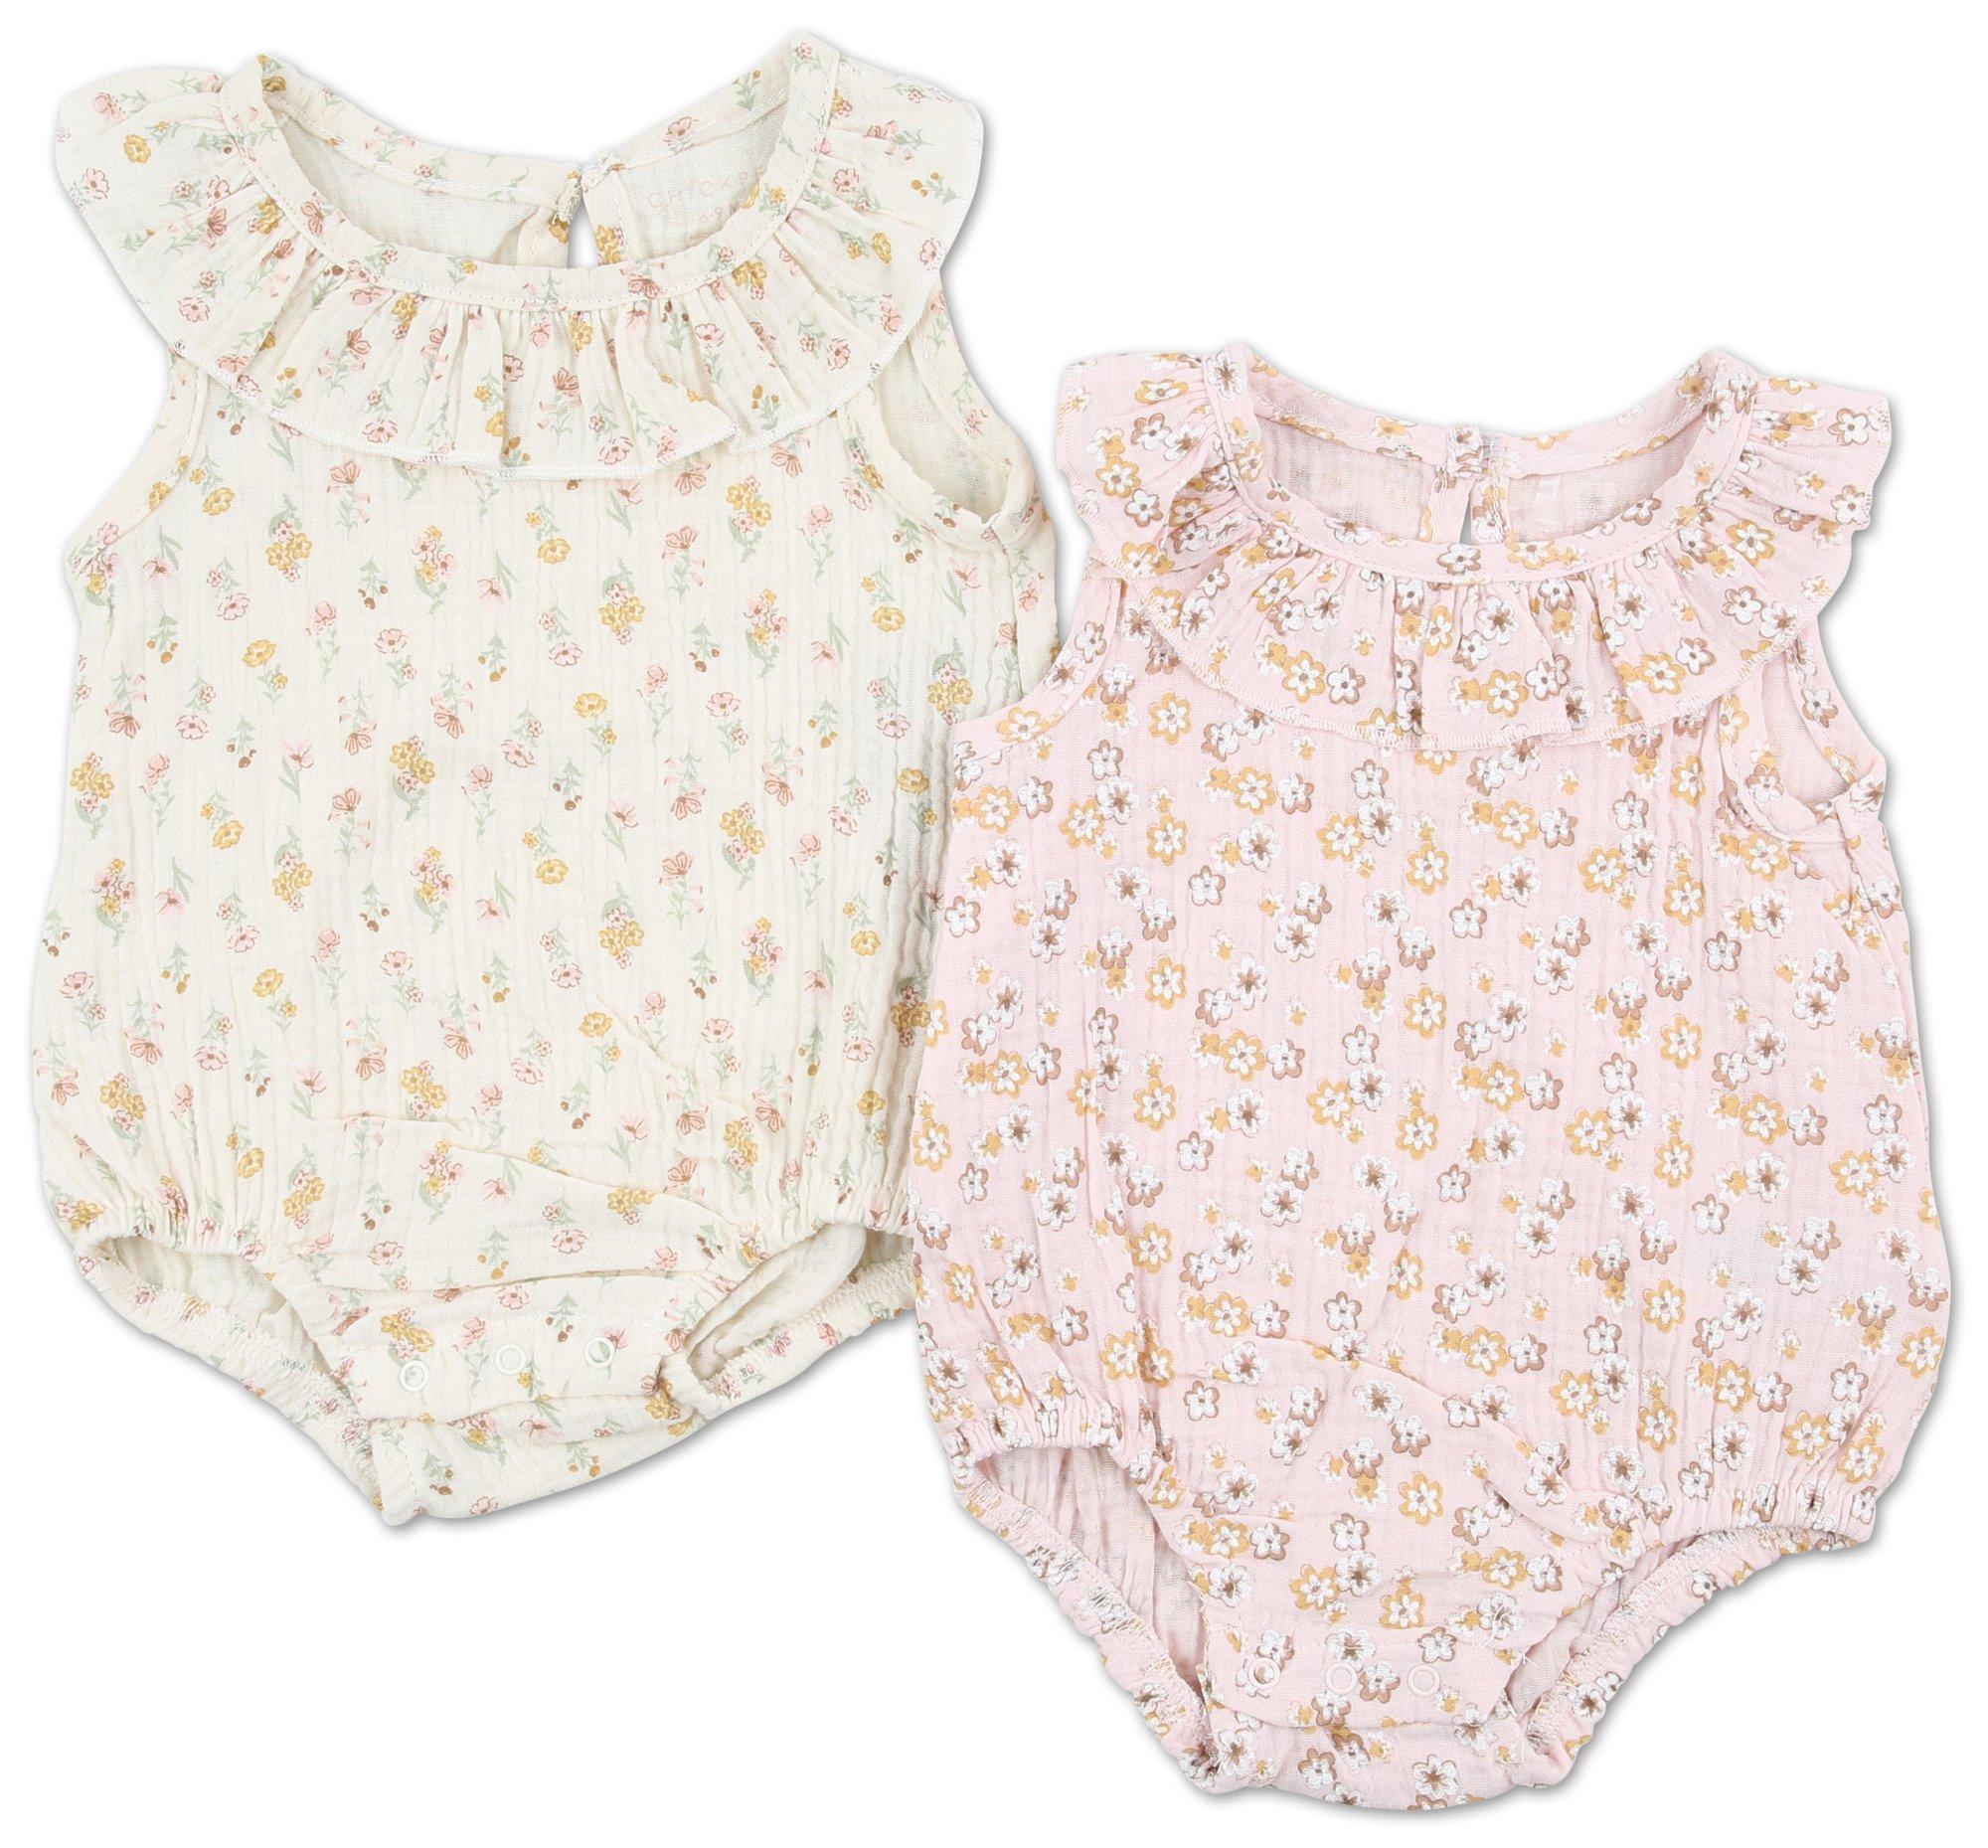 Baby Girls 2 Pc Rompers